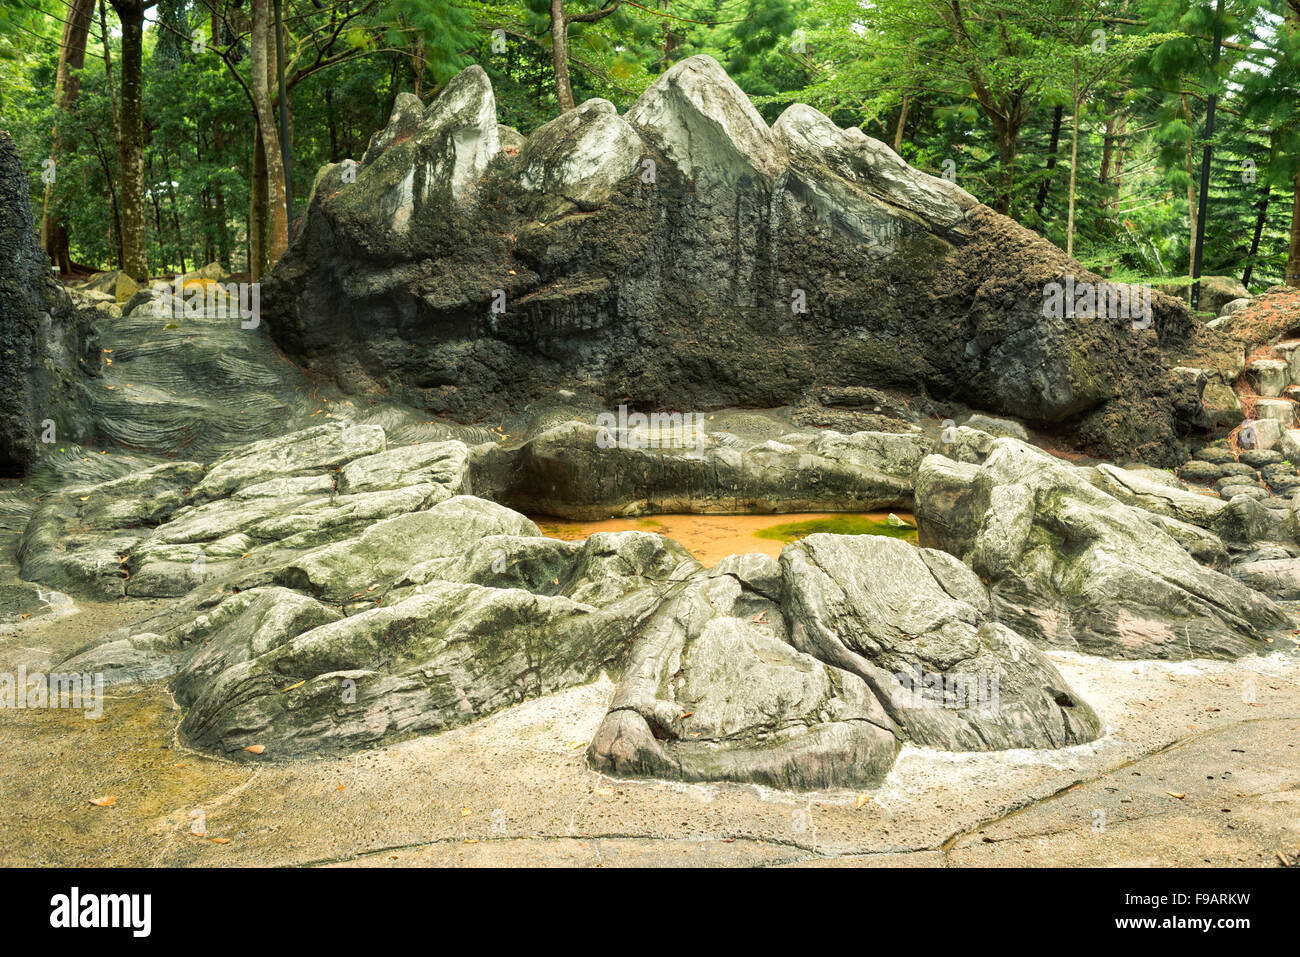 prehistoric artificial landscape with scenic stone cliffs and small pond in Singapore Botanical garden Stock Photo